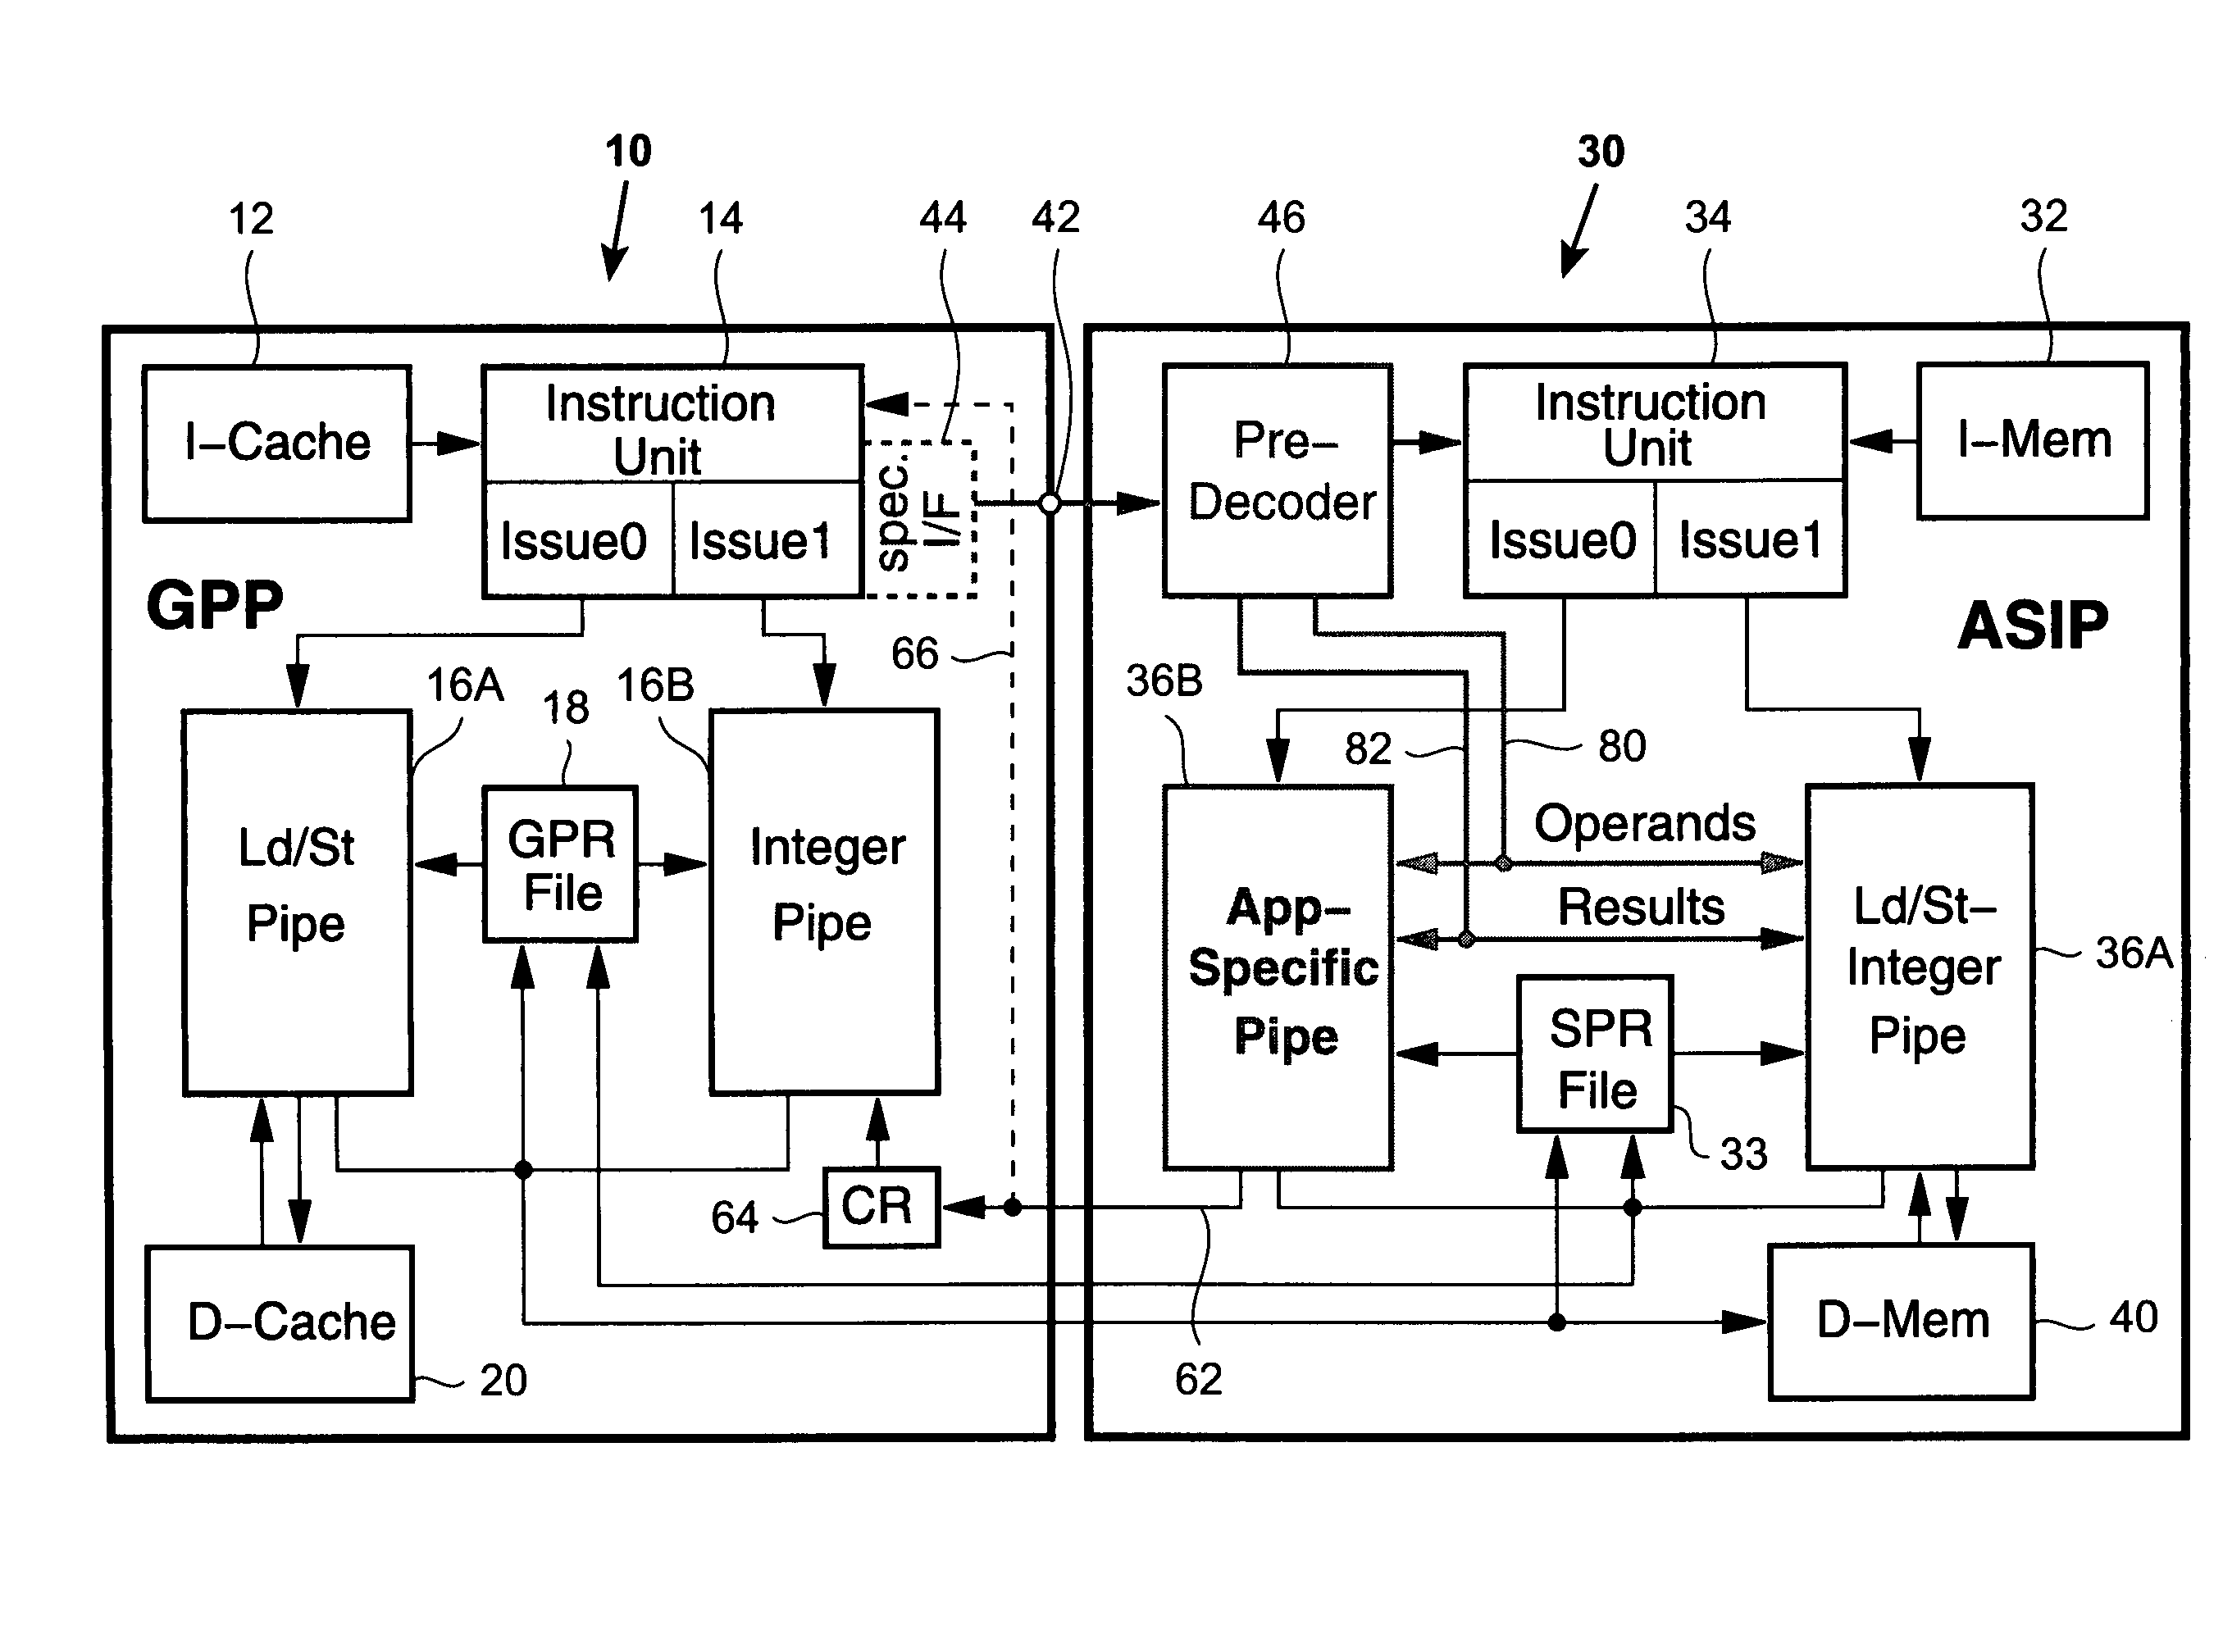 Coupling GP processor with reserved instruction interface via coprocessor port with operation data flow to application specific ISA processor with translation pre-decoder